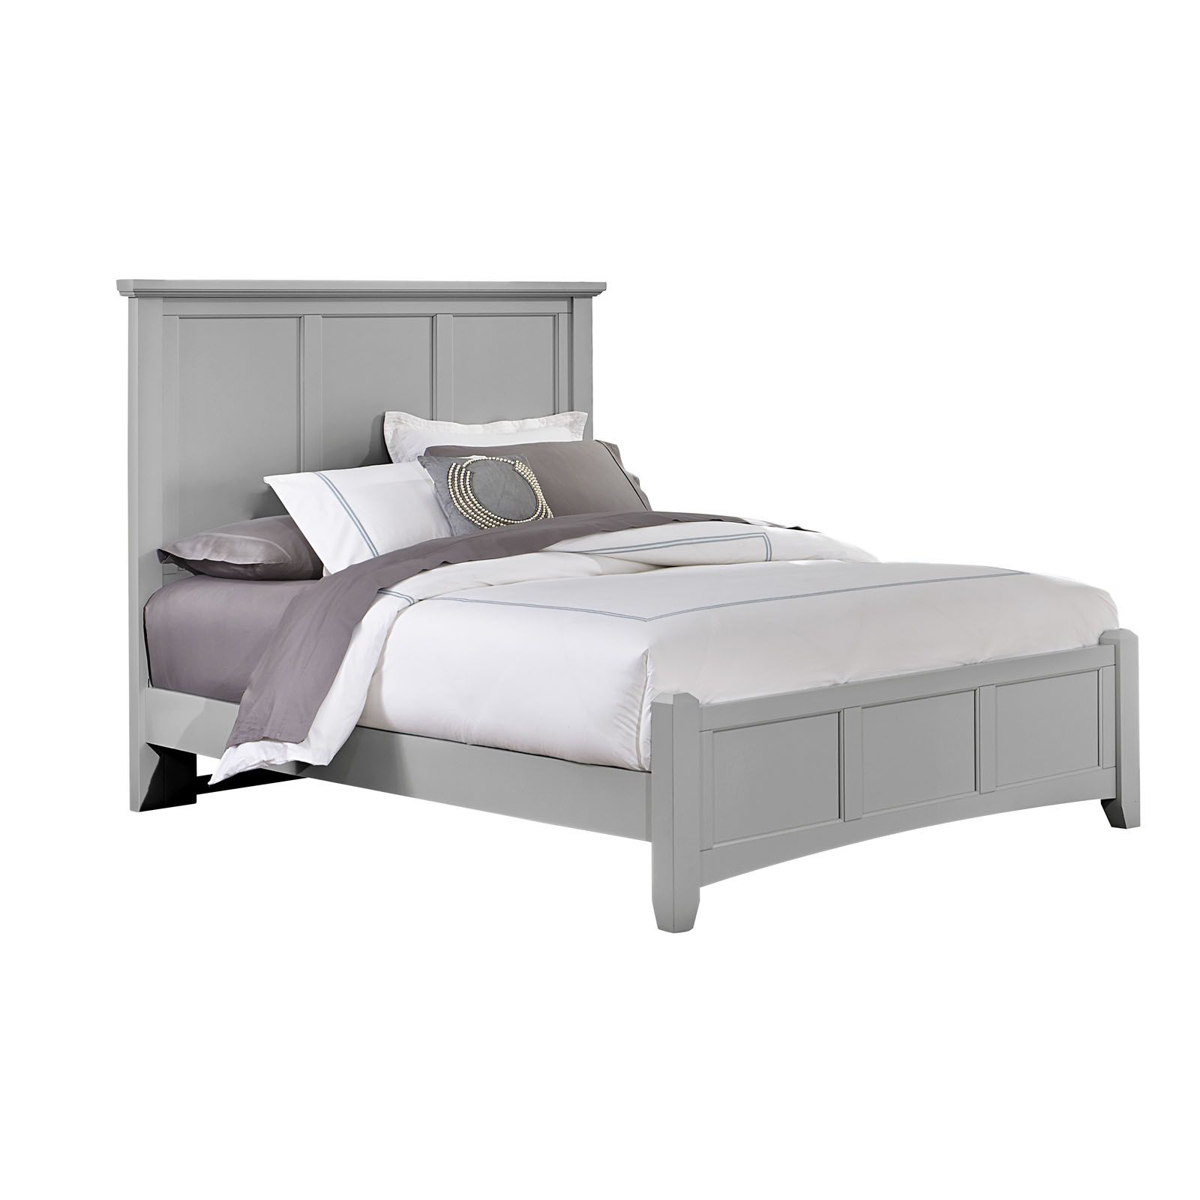 Picture of Gray Finish Full Size Bed